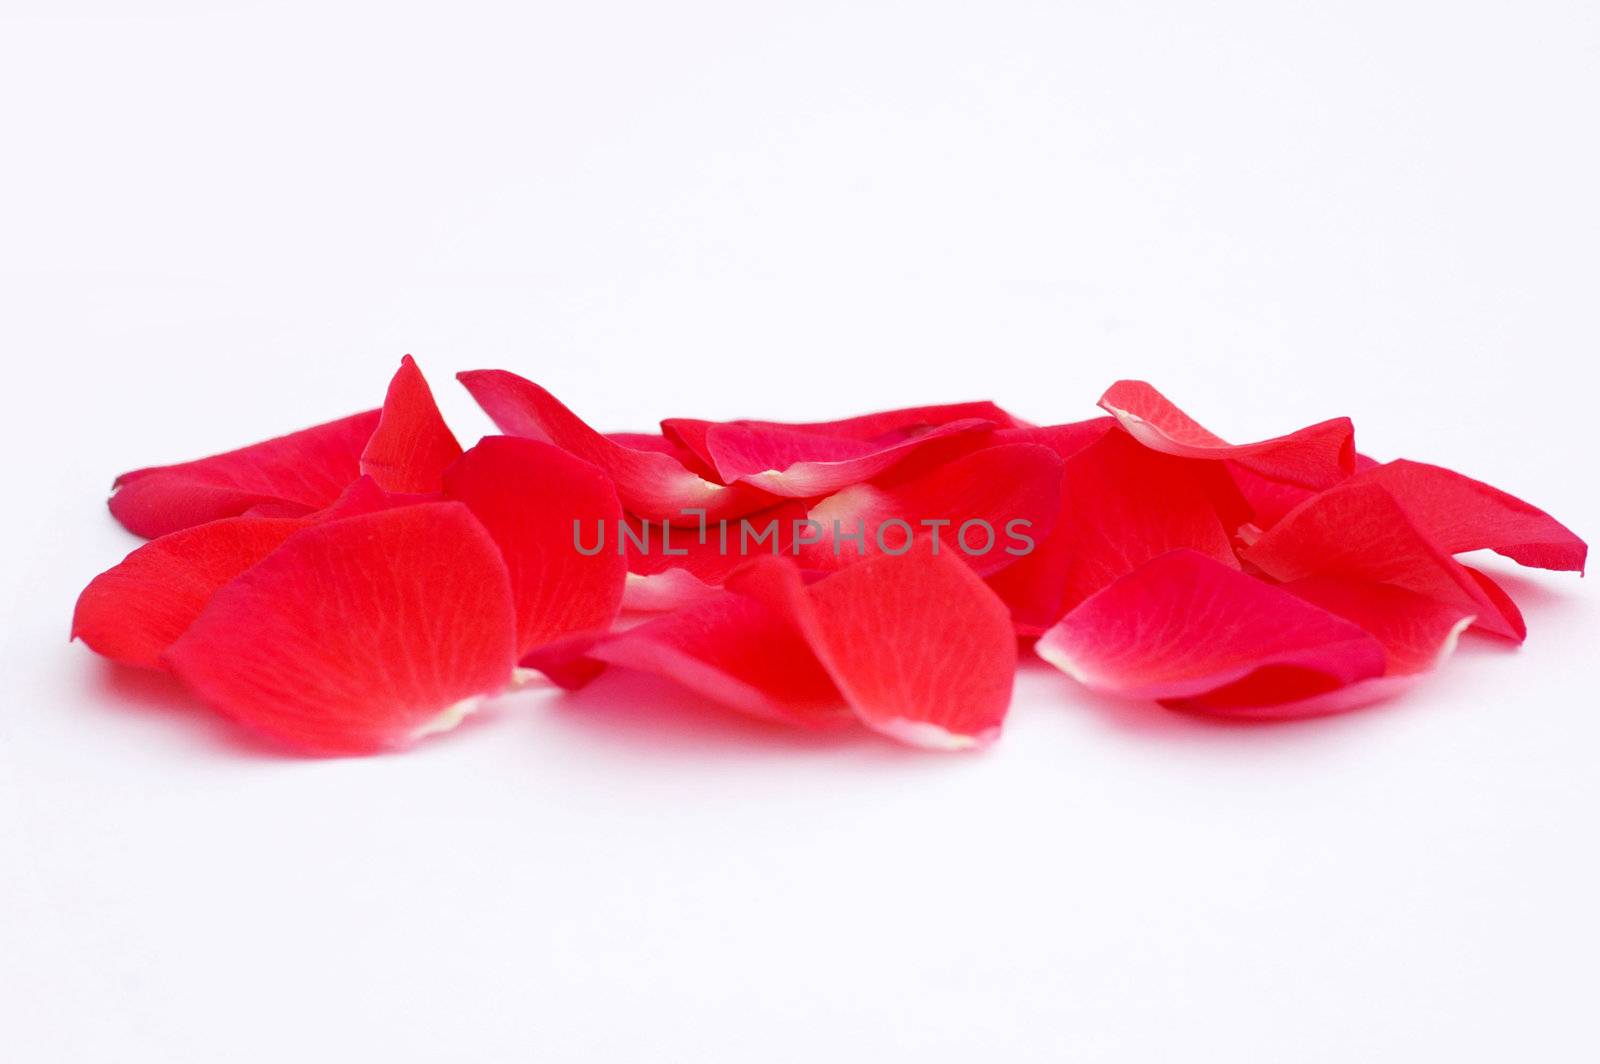 Some red rose petals isolated on white